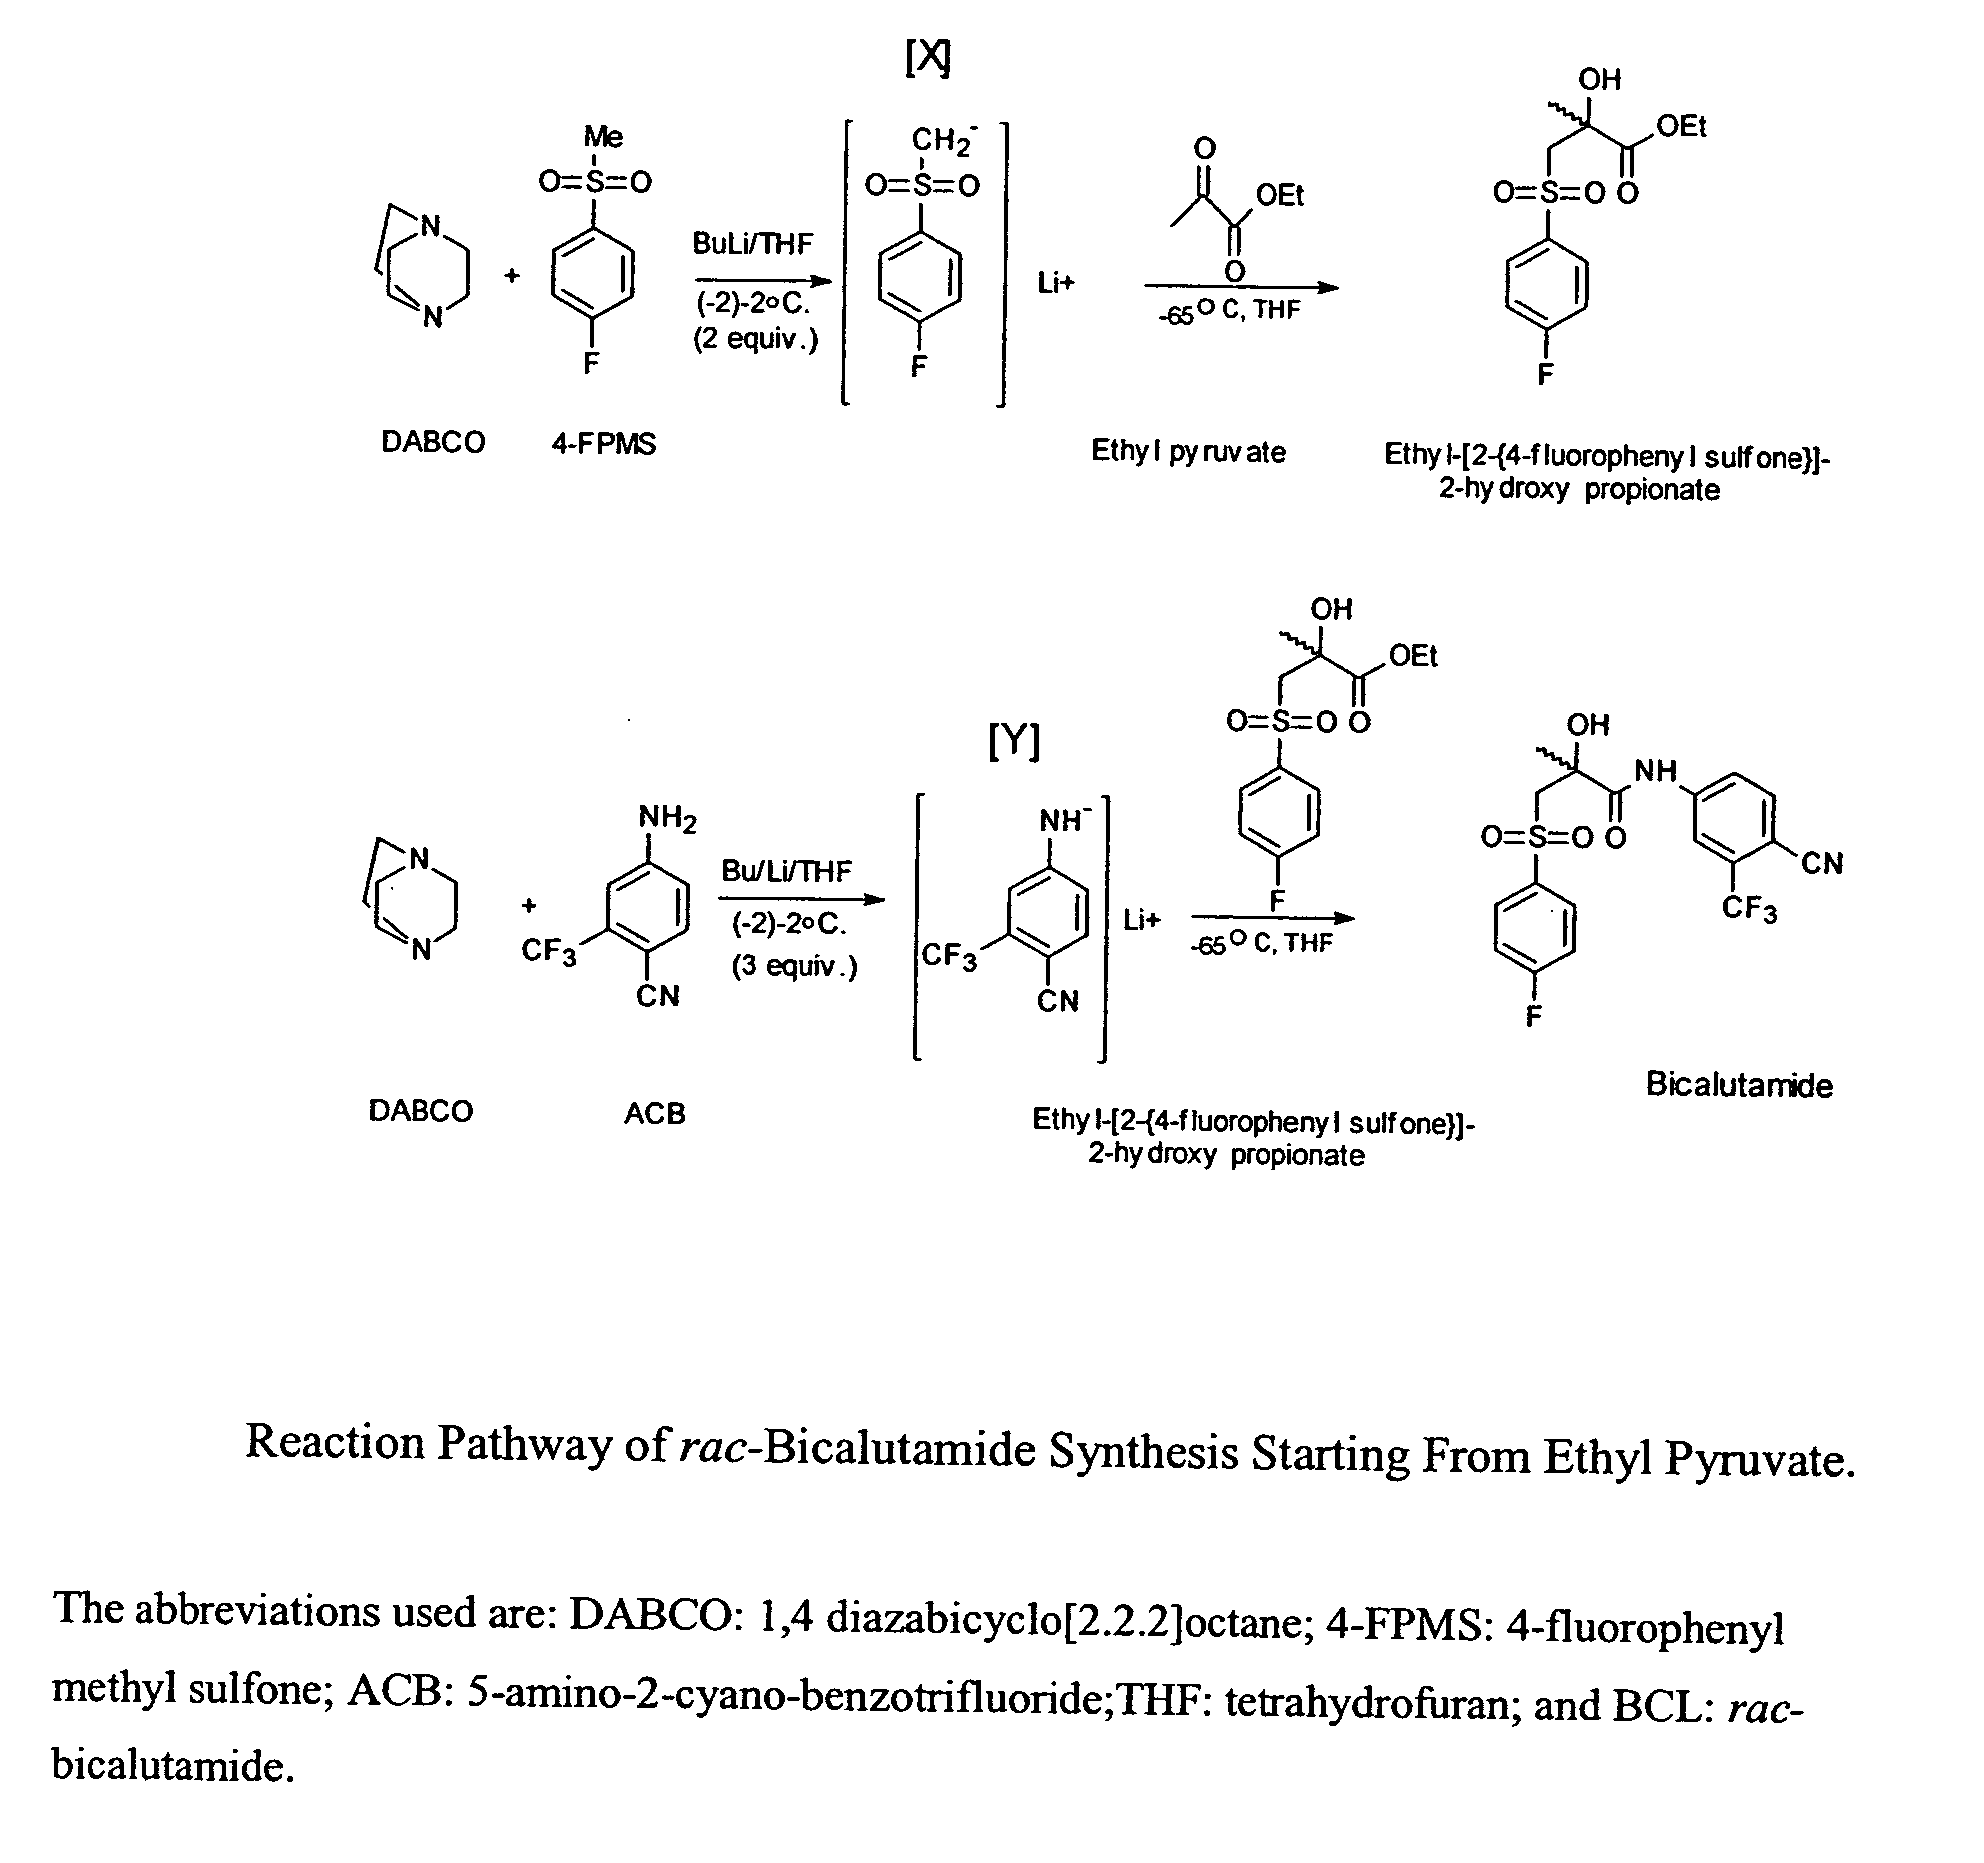 Novel process for preparing and isolating rac-bicalutamide and its intermediates